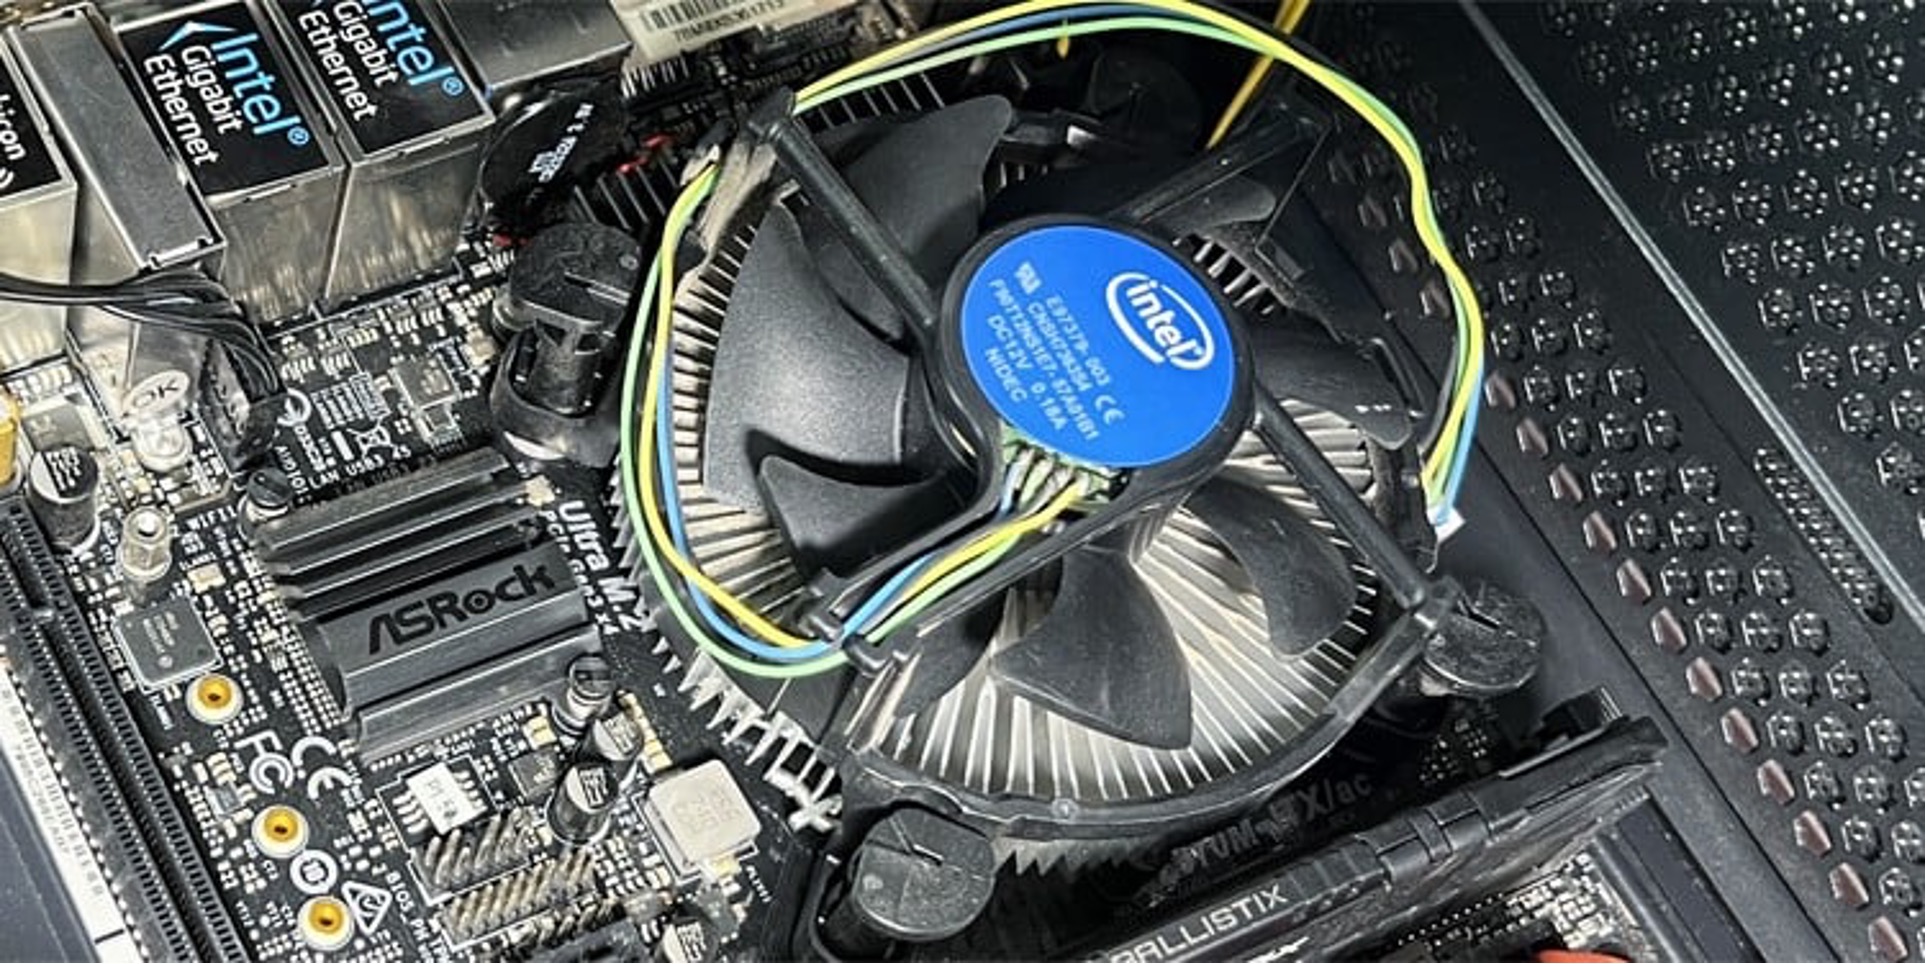 How To Control Cooler Master Case Fan Speeds